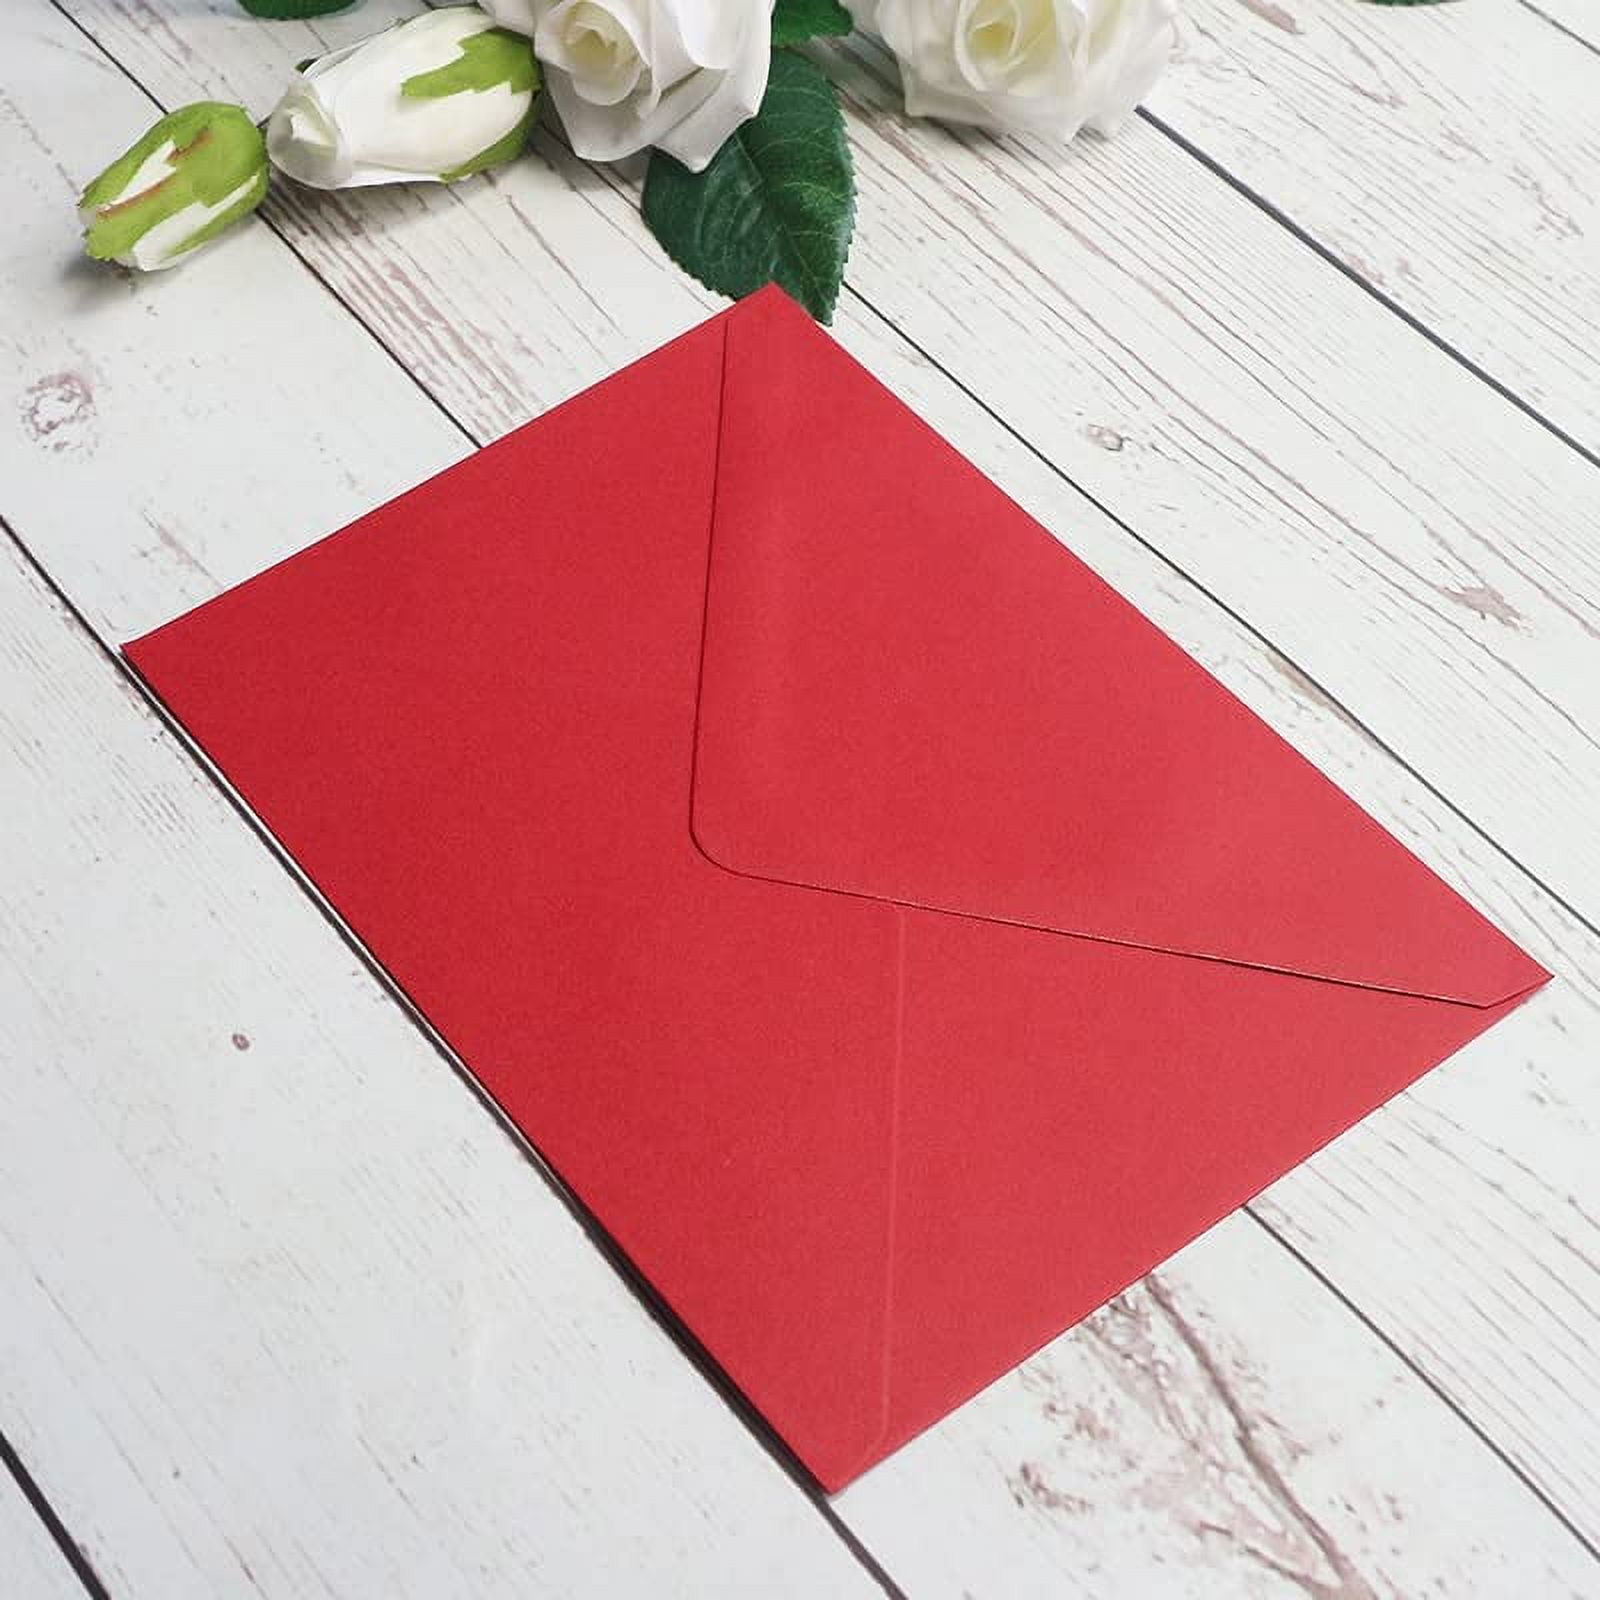 25 PCS Pearl Ivory Envelopes A7 ,5.35 x 7.7 inches, Perfect for 5x7 Wedding  Invitation Cards,Birthday Greeting RSVP Invite